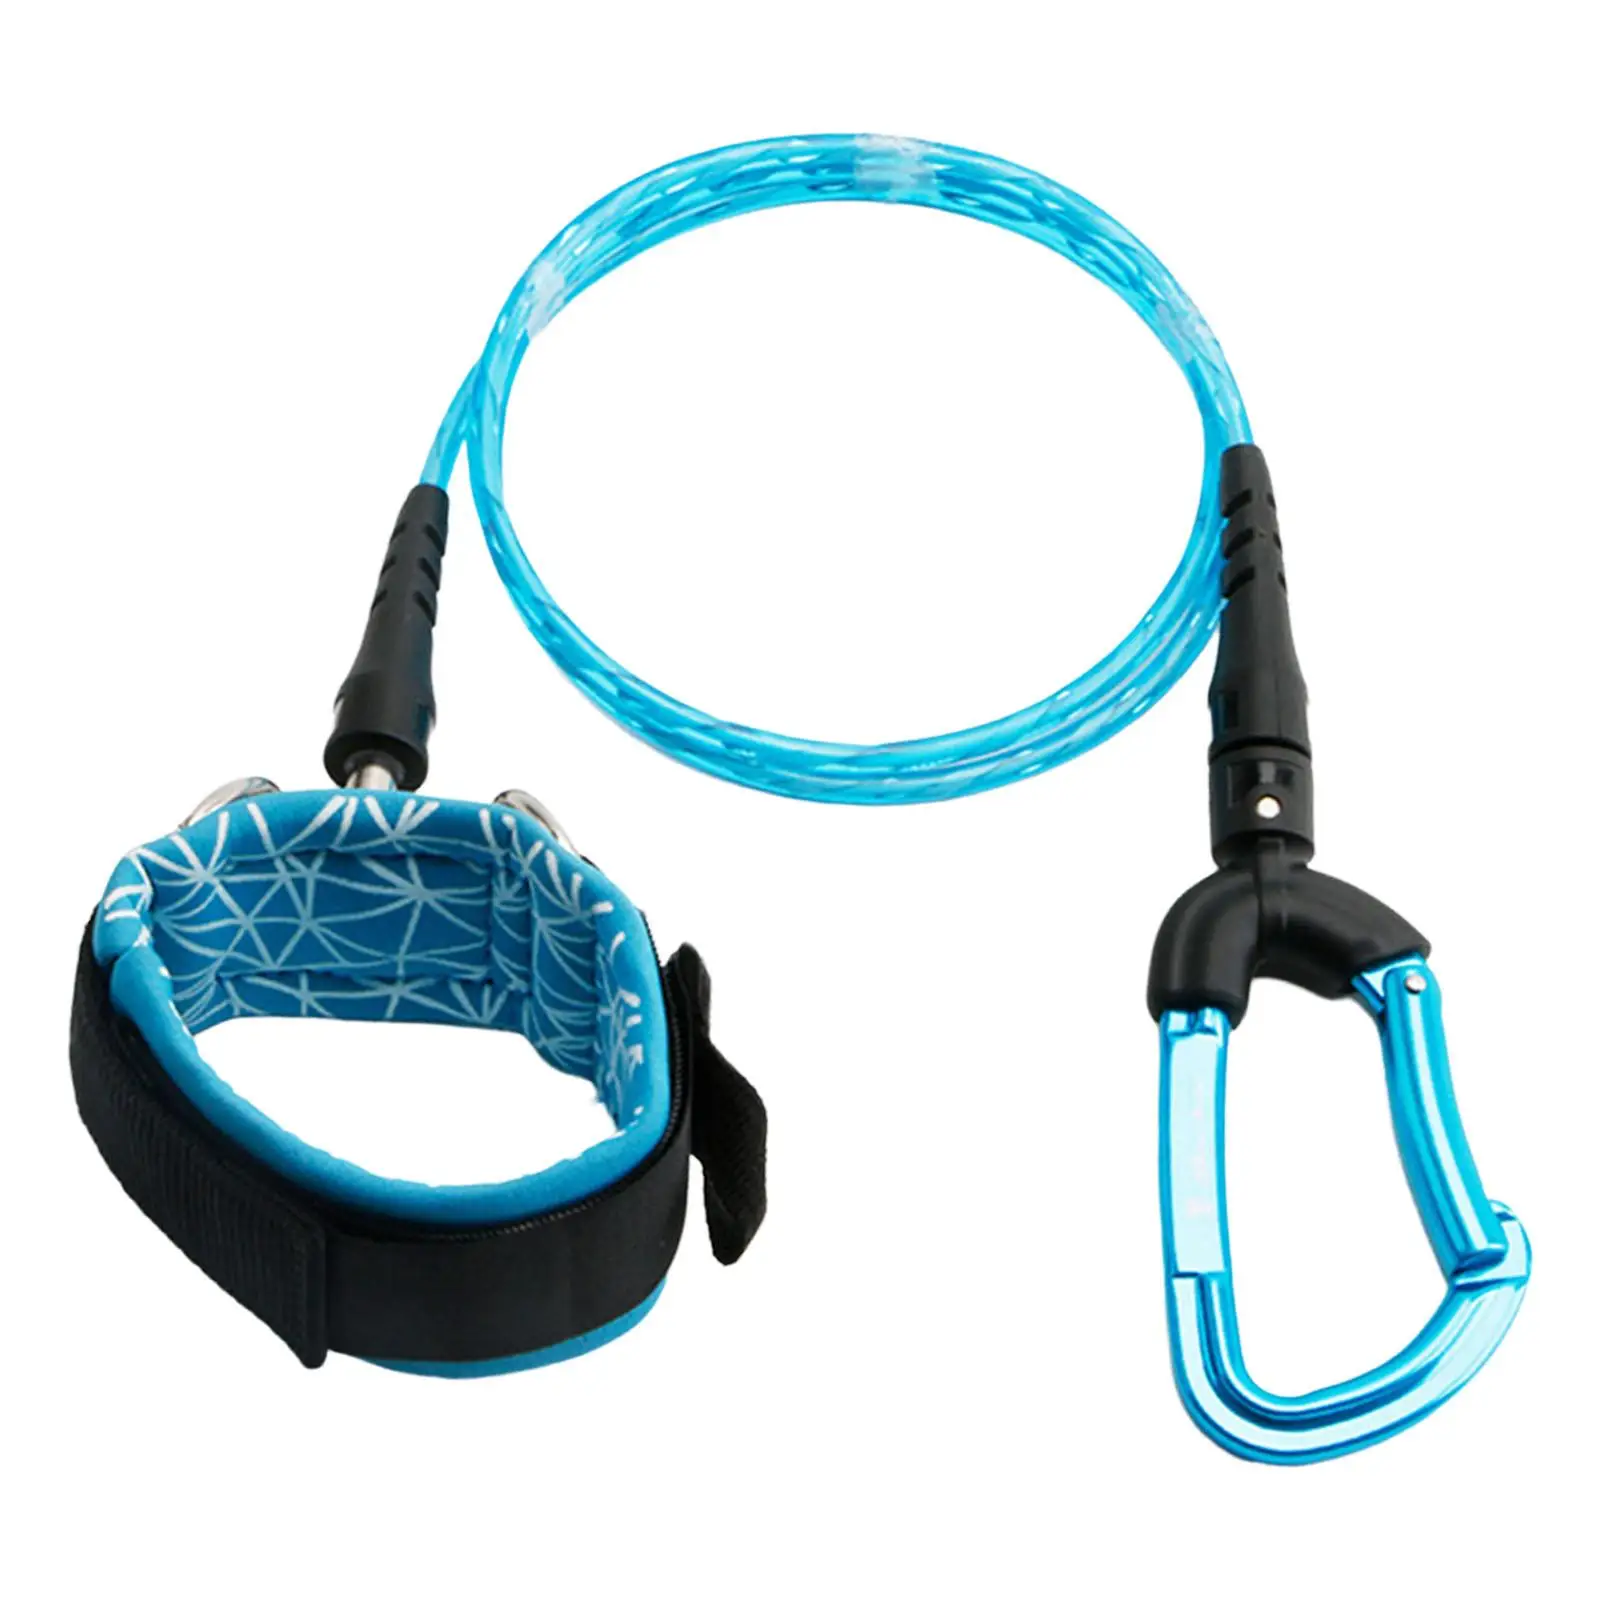 Freediving Lanyard Adjustable Breaking Force 24kN with Dive Wristband for Drift Diving Underwater Sports Freediving